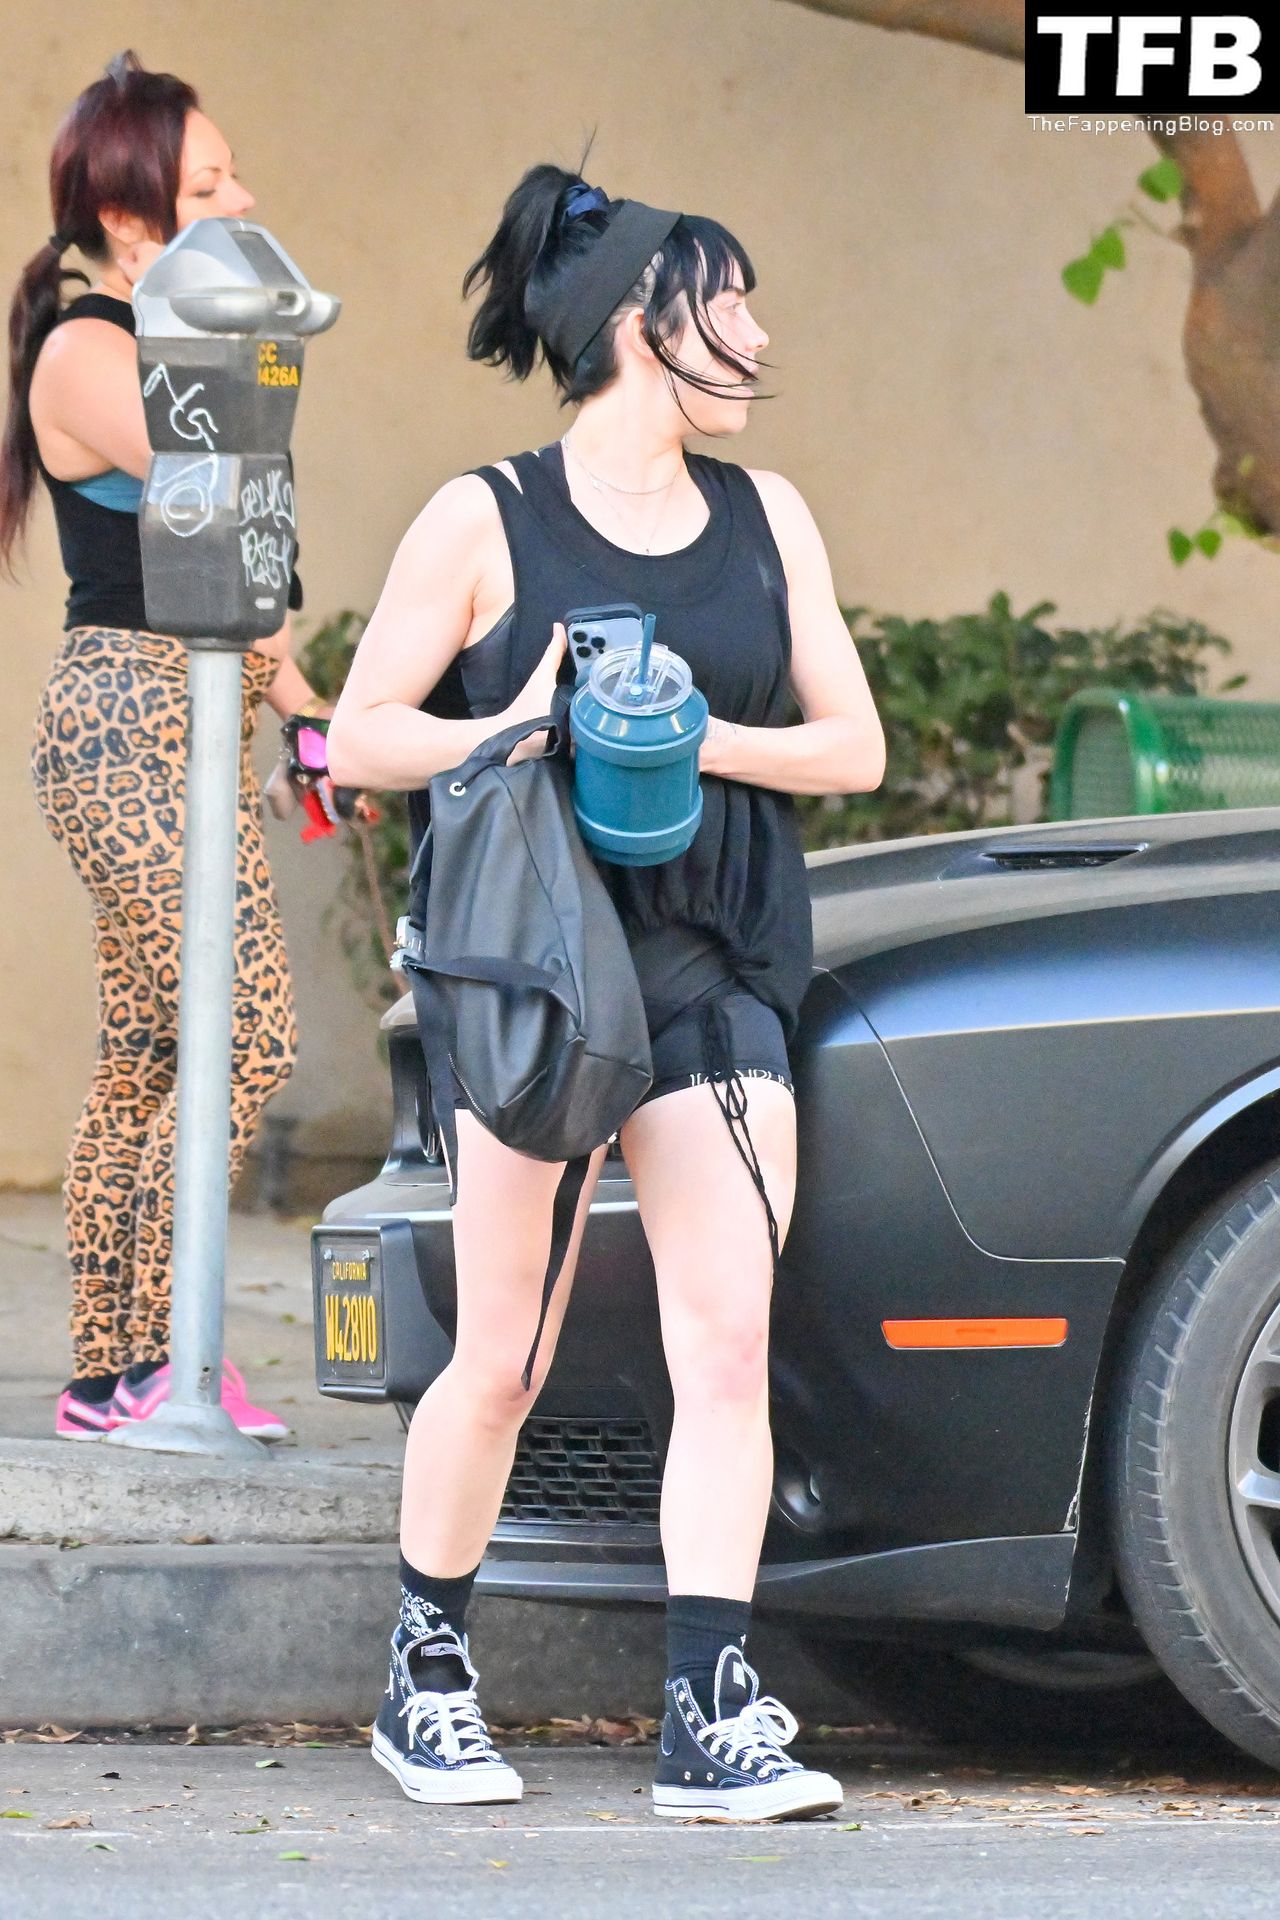 Billie Eilish Sexy The Fappening Blog 11 - Billie Eilish Keeps Up Her Fitness Regime, Stepping Out For Another Workout in Studio City (26 Photos)